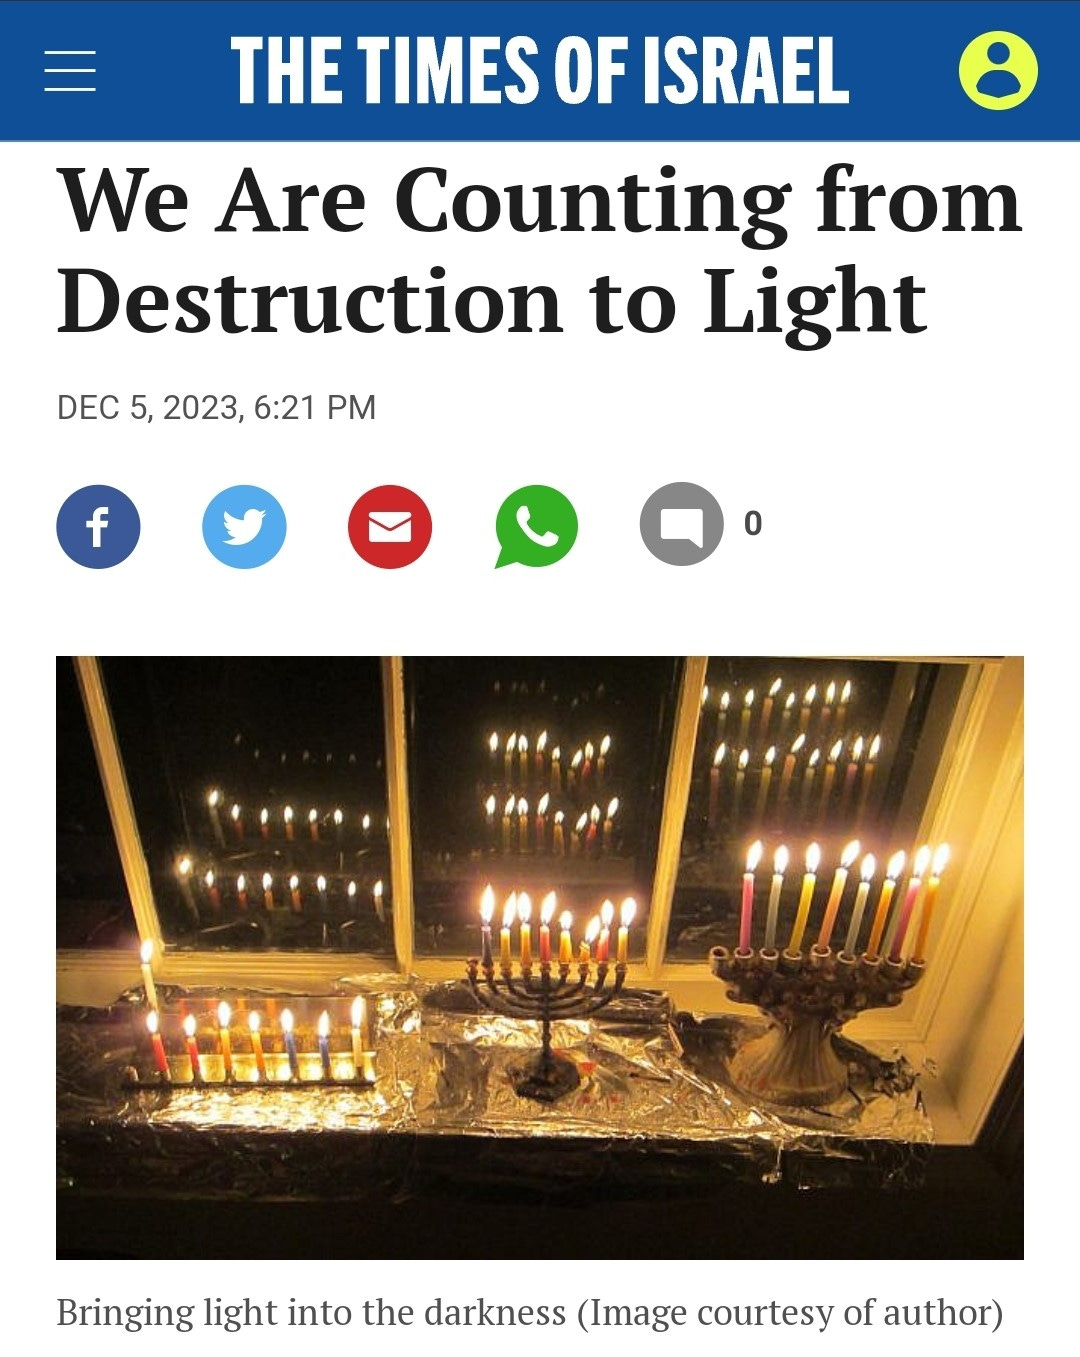 The Times of Israel / We are Counting from Destruction to Light, December 5, 2023, 6:21PM, picture shows three lit candle menorahs with lights reflected many times in a window